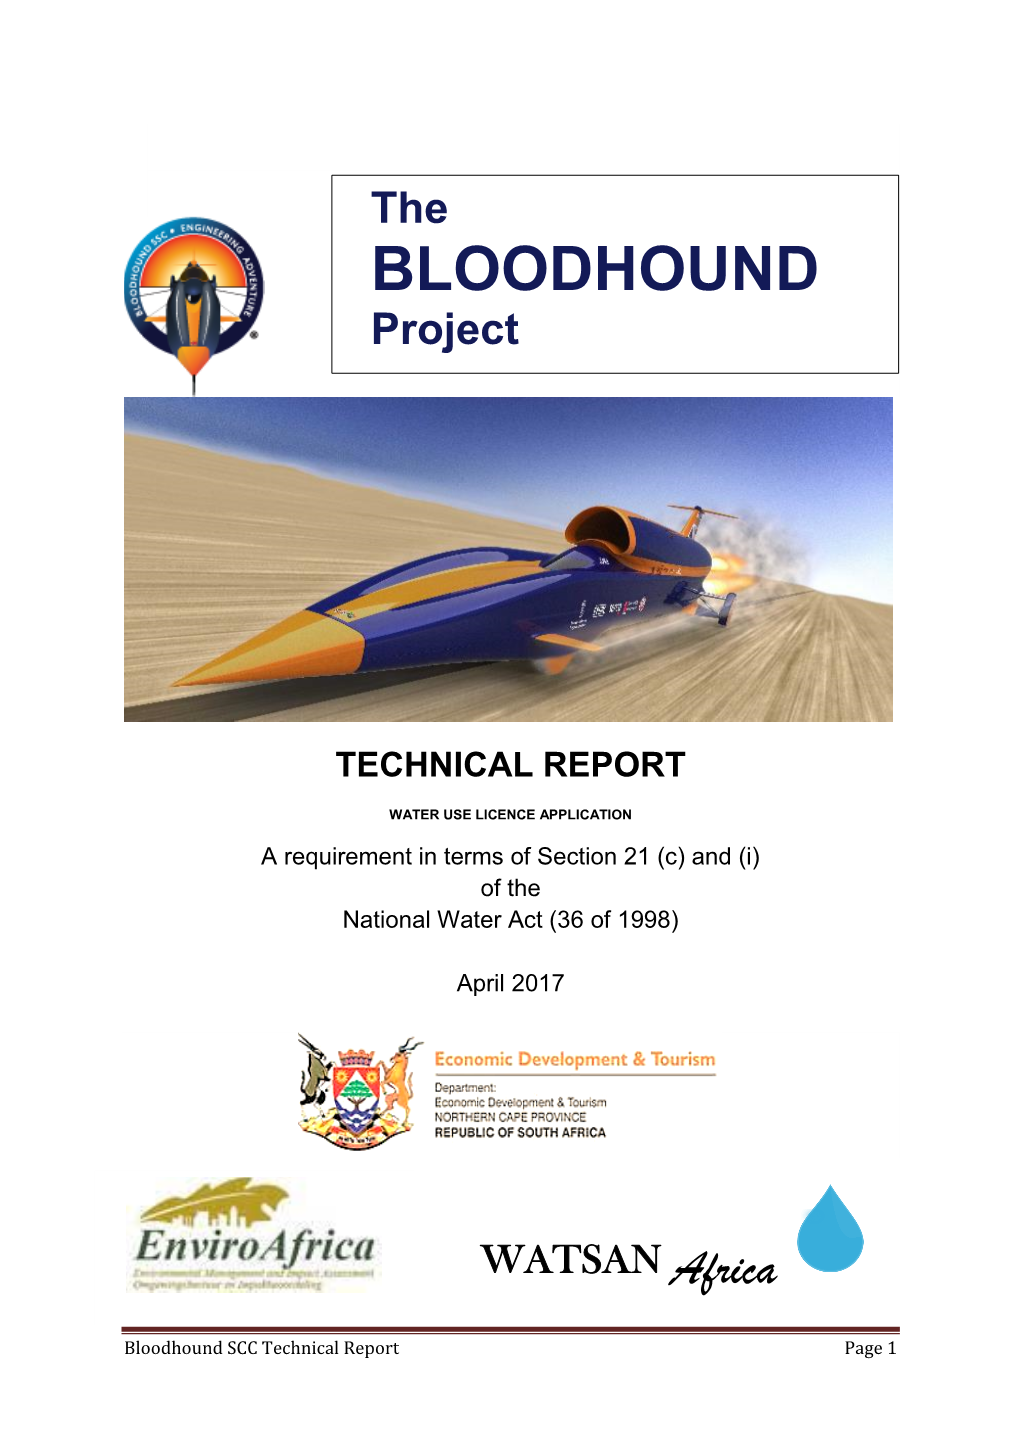 BLOODHOUND Project